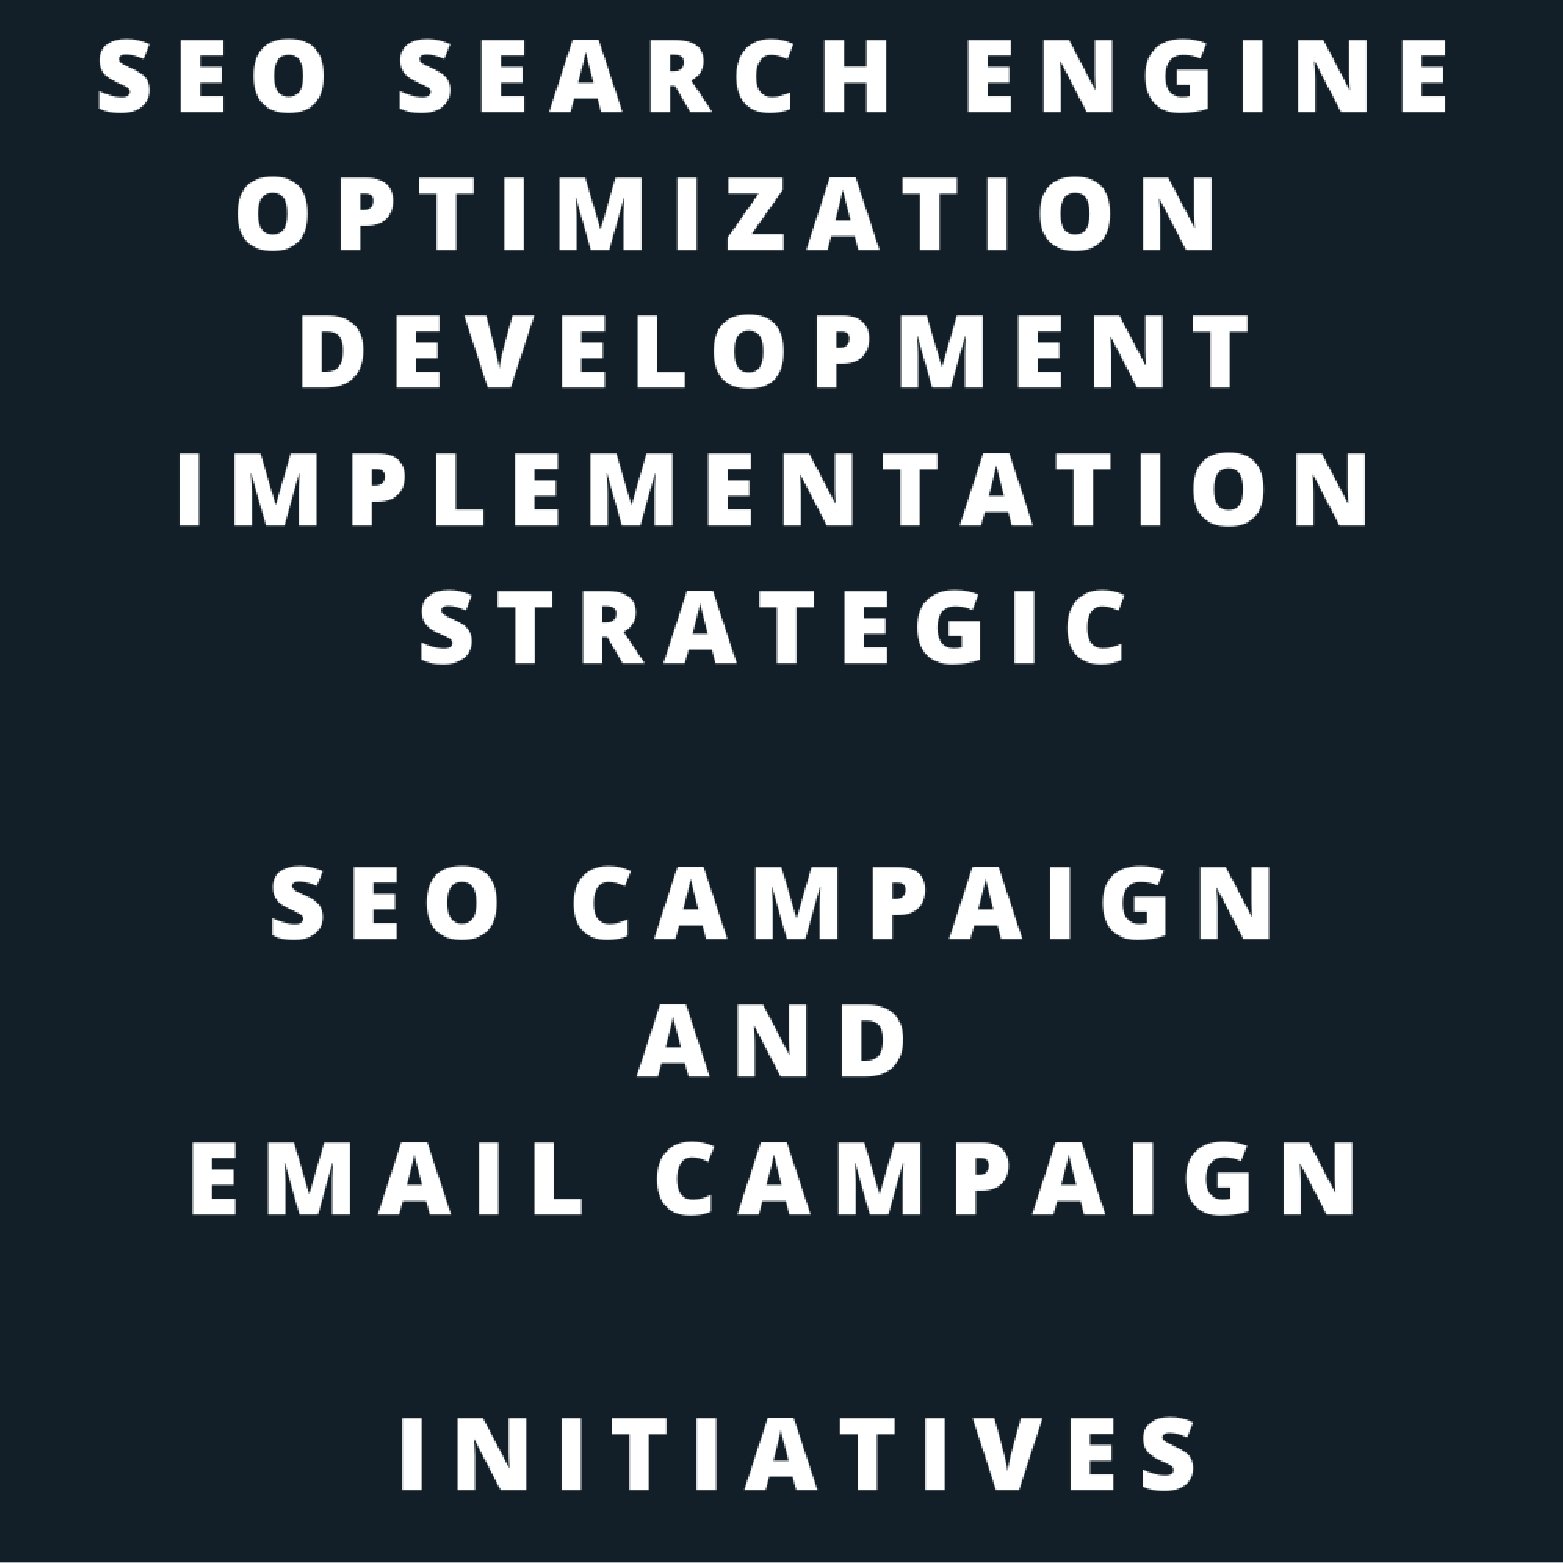 SEO search engine optimization and development and implementation strategic SEO campaign initiatives